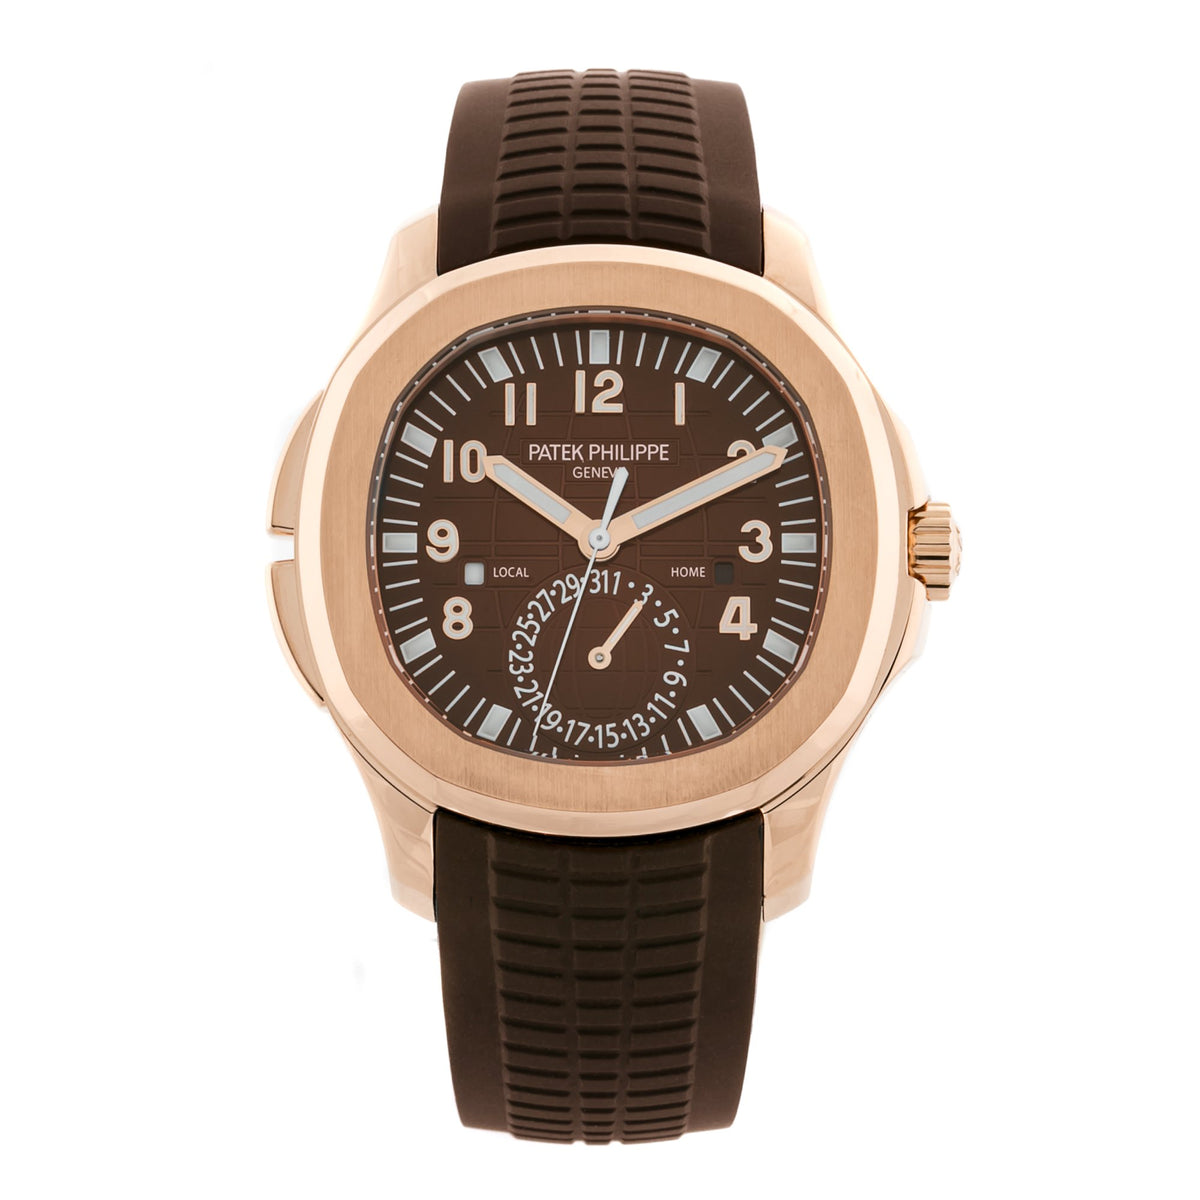 Pre-Owned 2020 Patek Philippe 5164r Aquanaut 'Travel Time' Watch